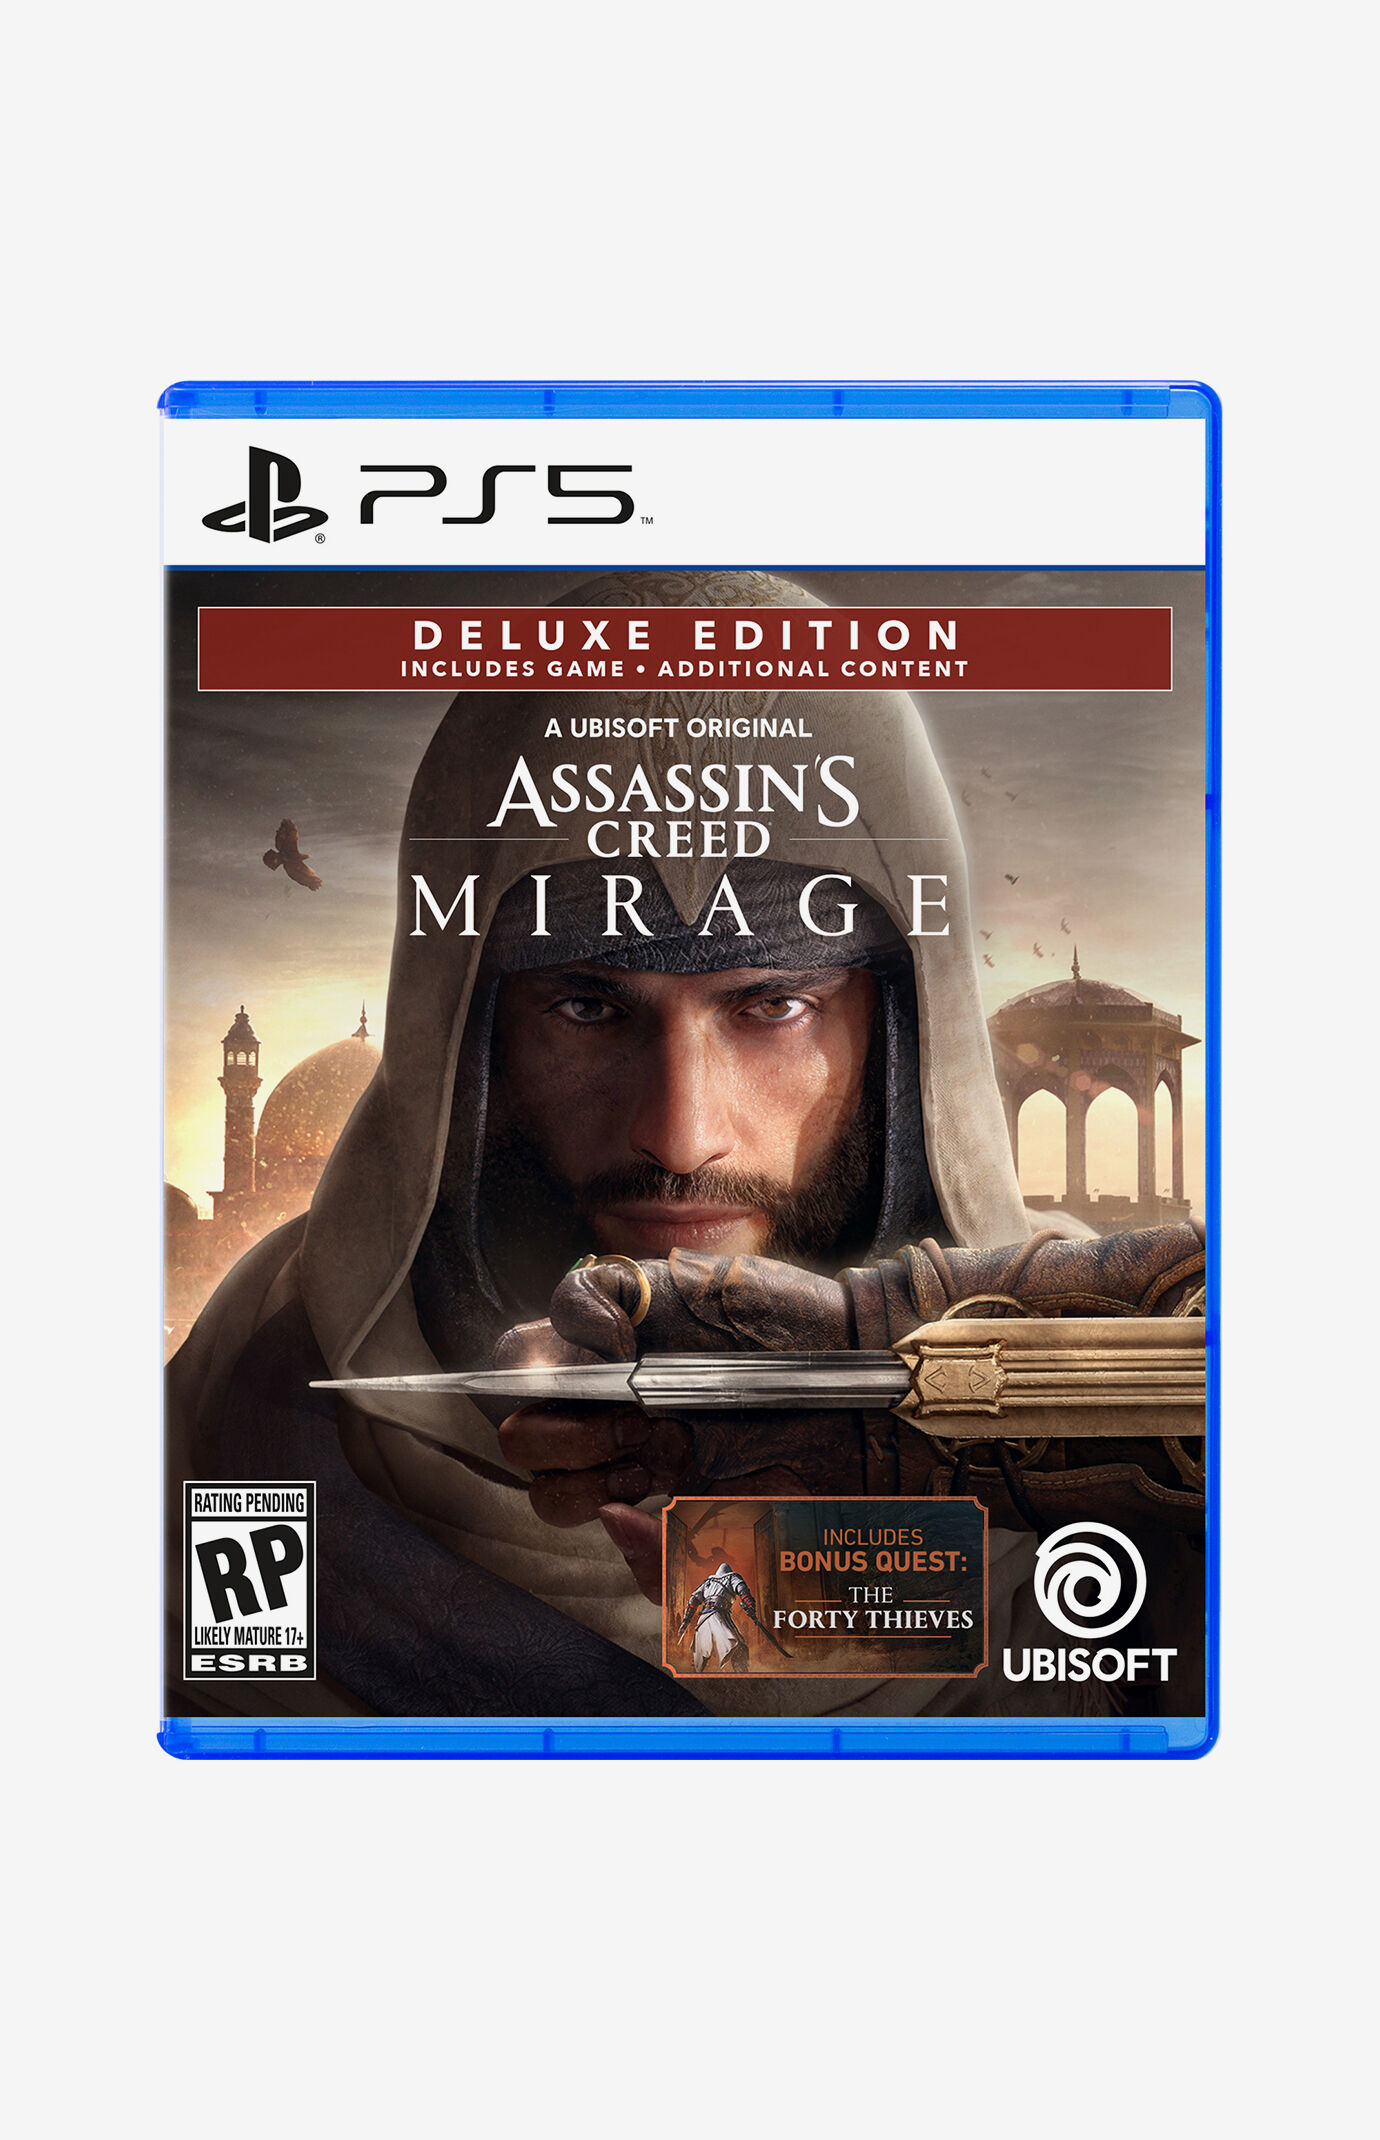 Assassin's Creed Mirage Deluxe Edition for PlayStation 5